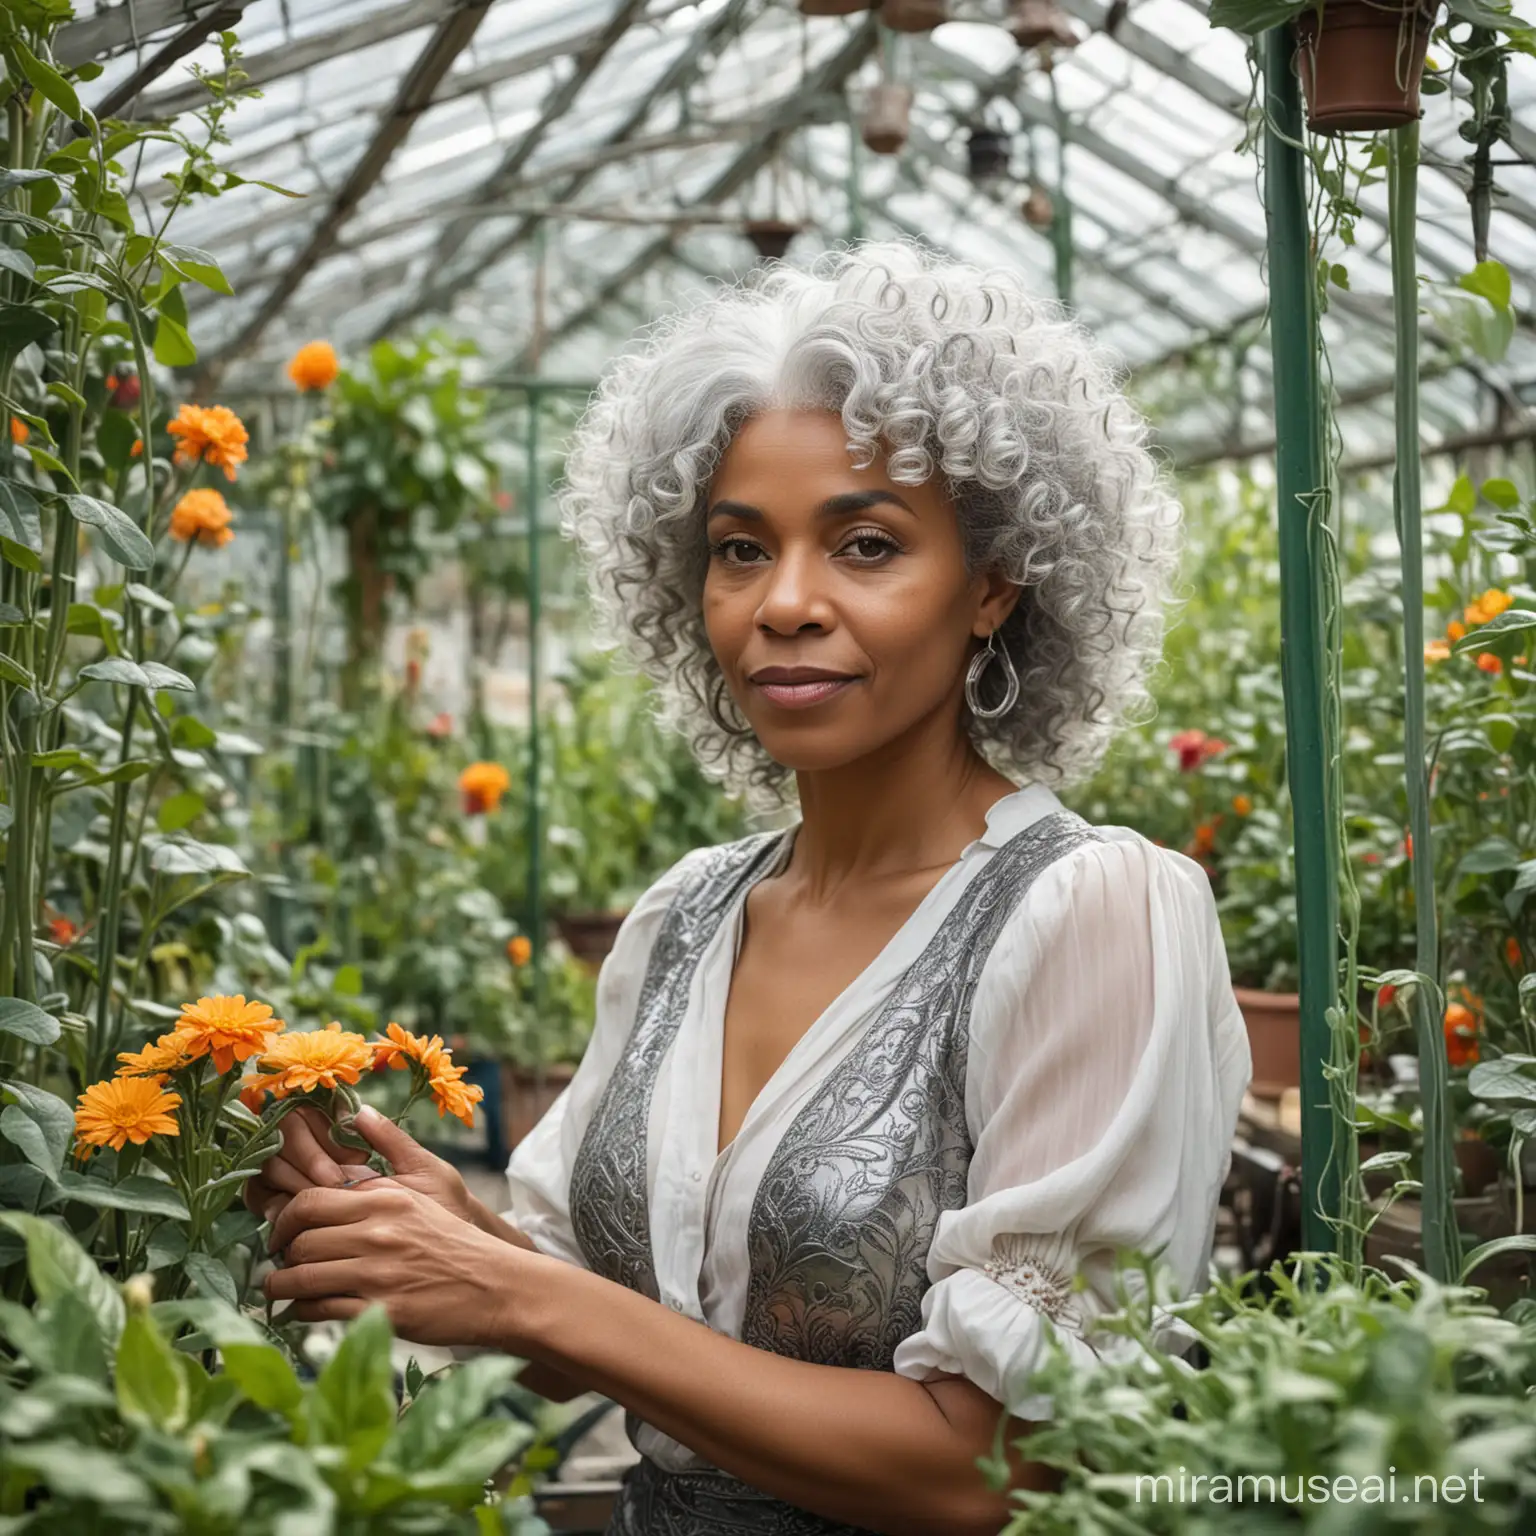 art nouveau style, older beautiful black woman with silver curly hair, working in garden greenhouse, magical world, hopeful, bright and colorful 